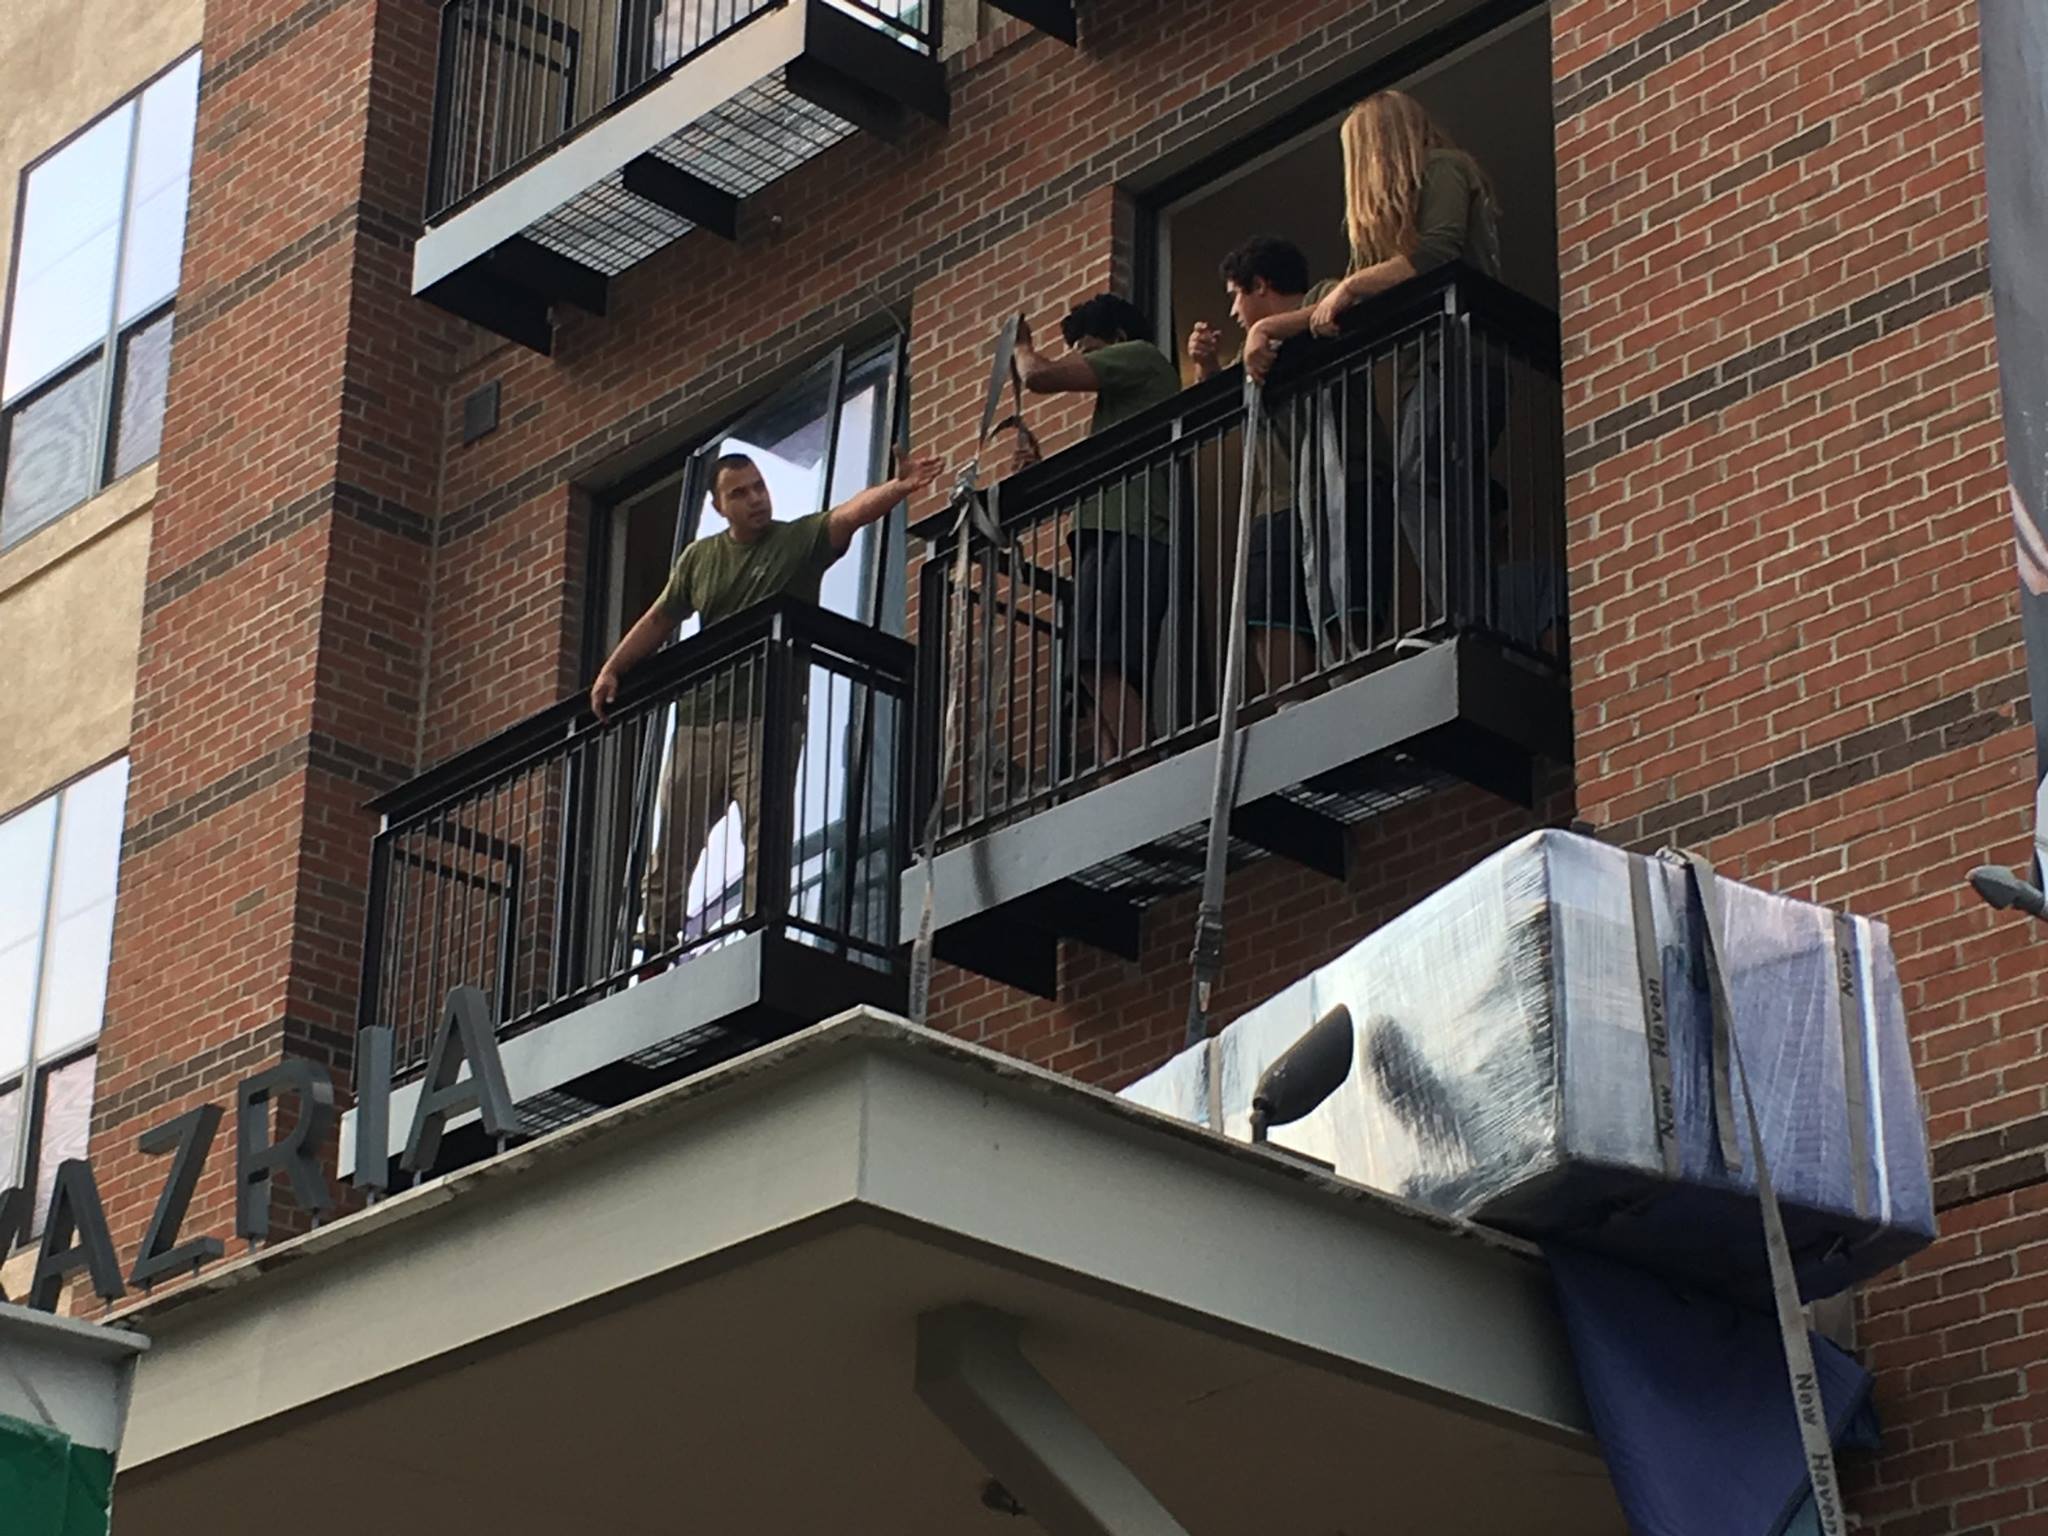 A crew moves a piece of furniture down a multistory building using the balcony